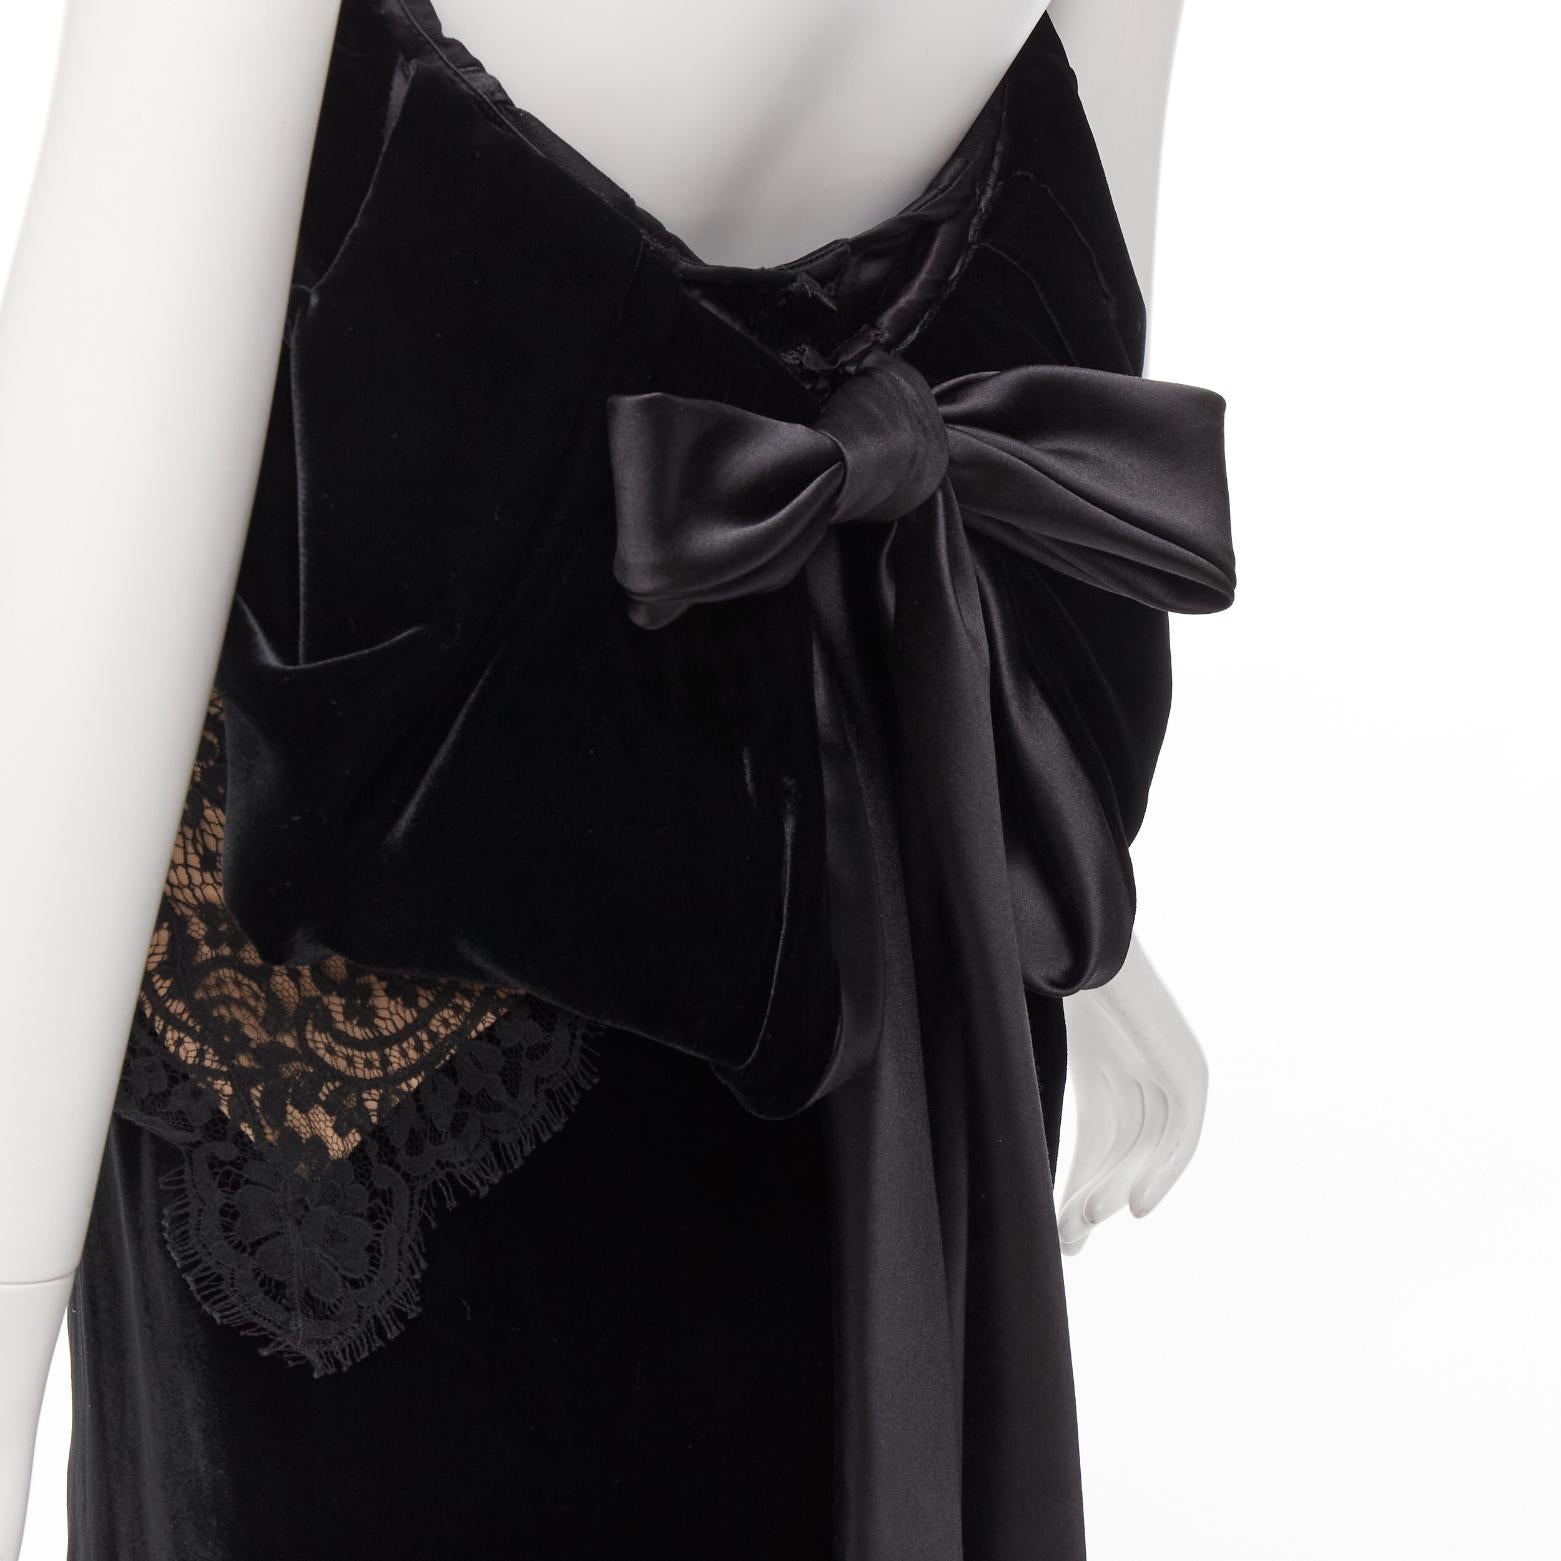 TOM FORD black satin velvet bow bustle illusion lace trim long column gown IT40 S
Reference: TGAS/D01114
Brand: Tom Ford
Designer: Tom Ford
Material: Viscose, Wool, Blend
Color: Nude
Pattern: Lace
Closure: Zip
Lining: Black Fabric
Extra Details: